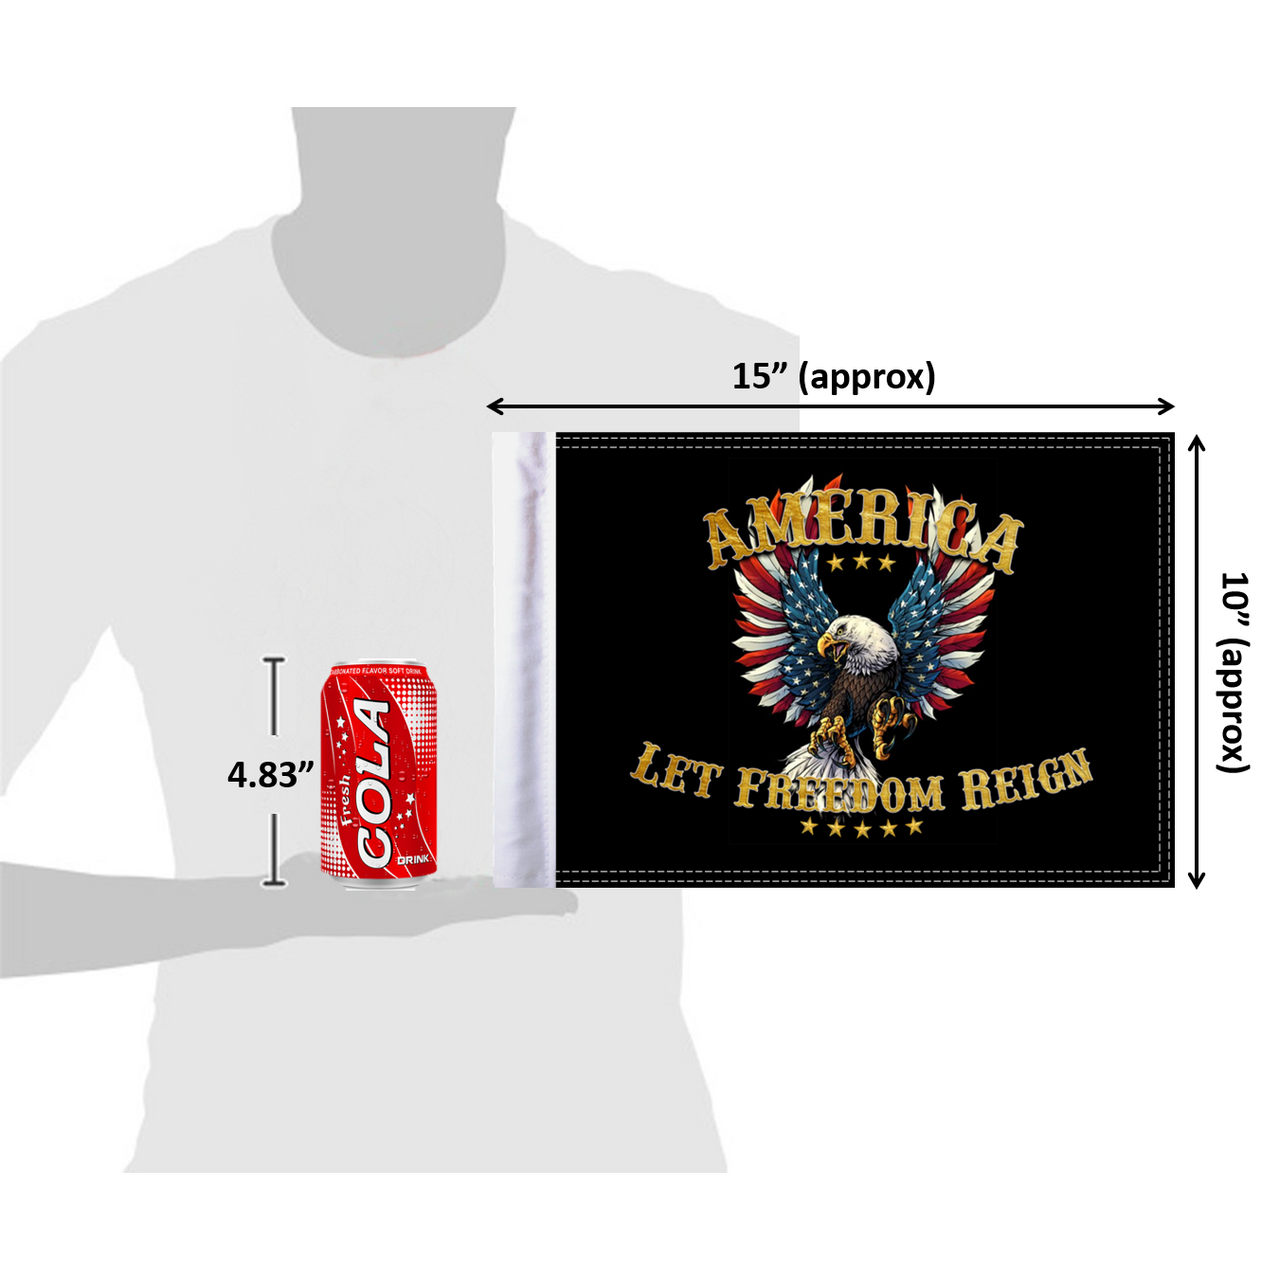 10"x15" America Let Freedom Reign (size comparison view)